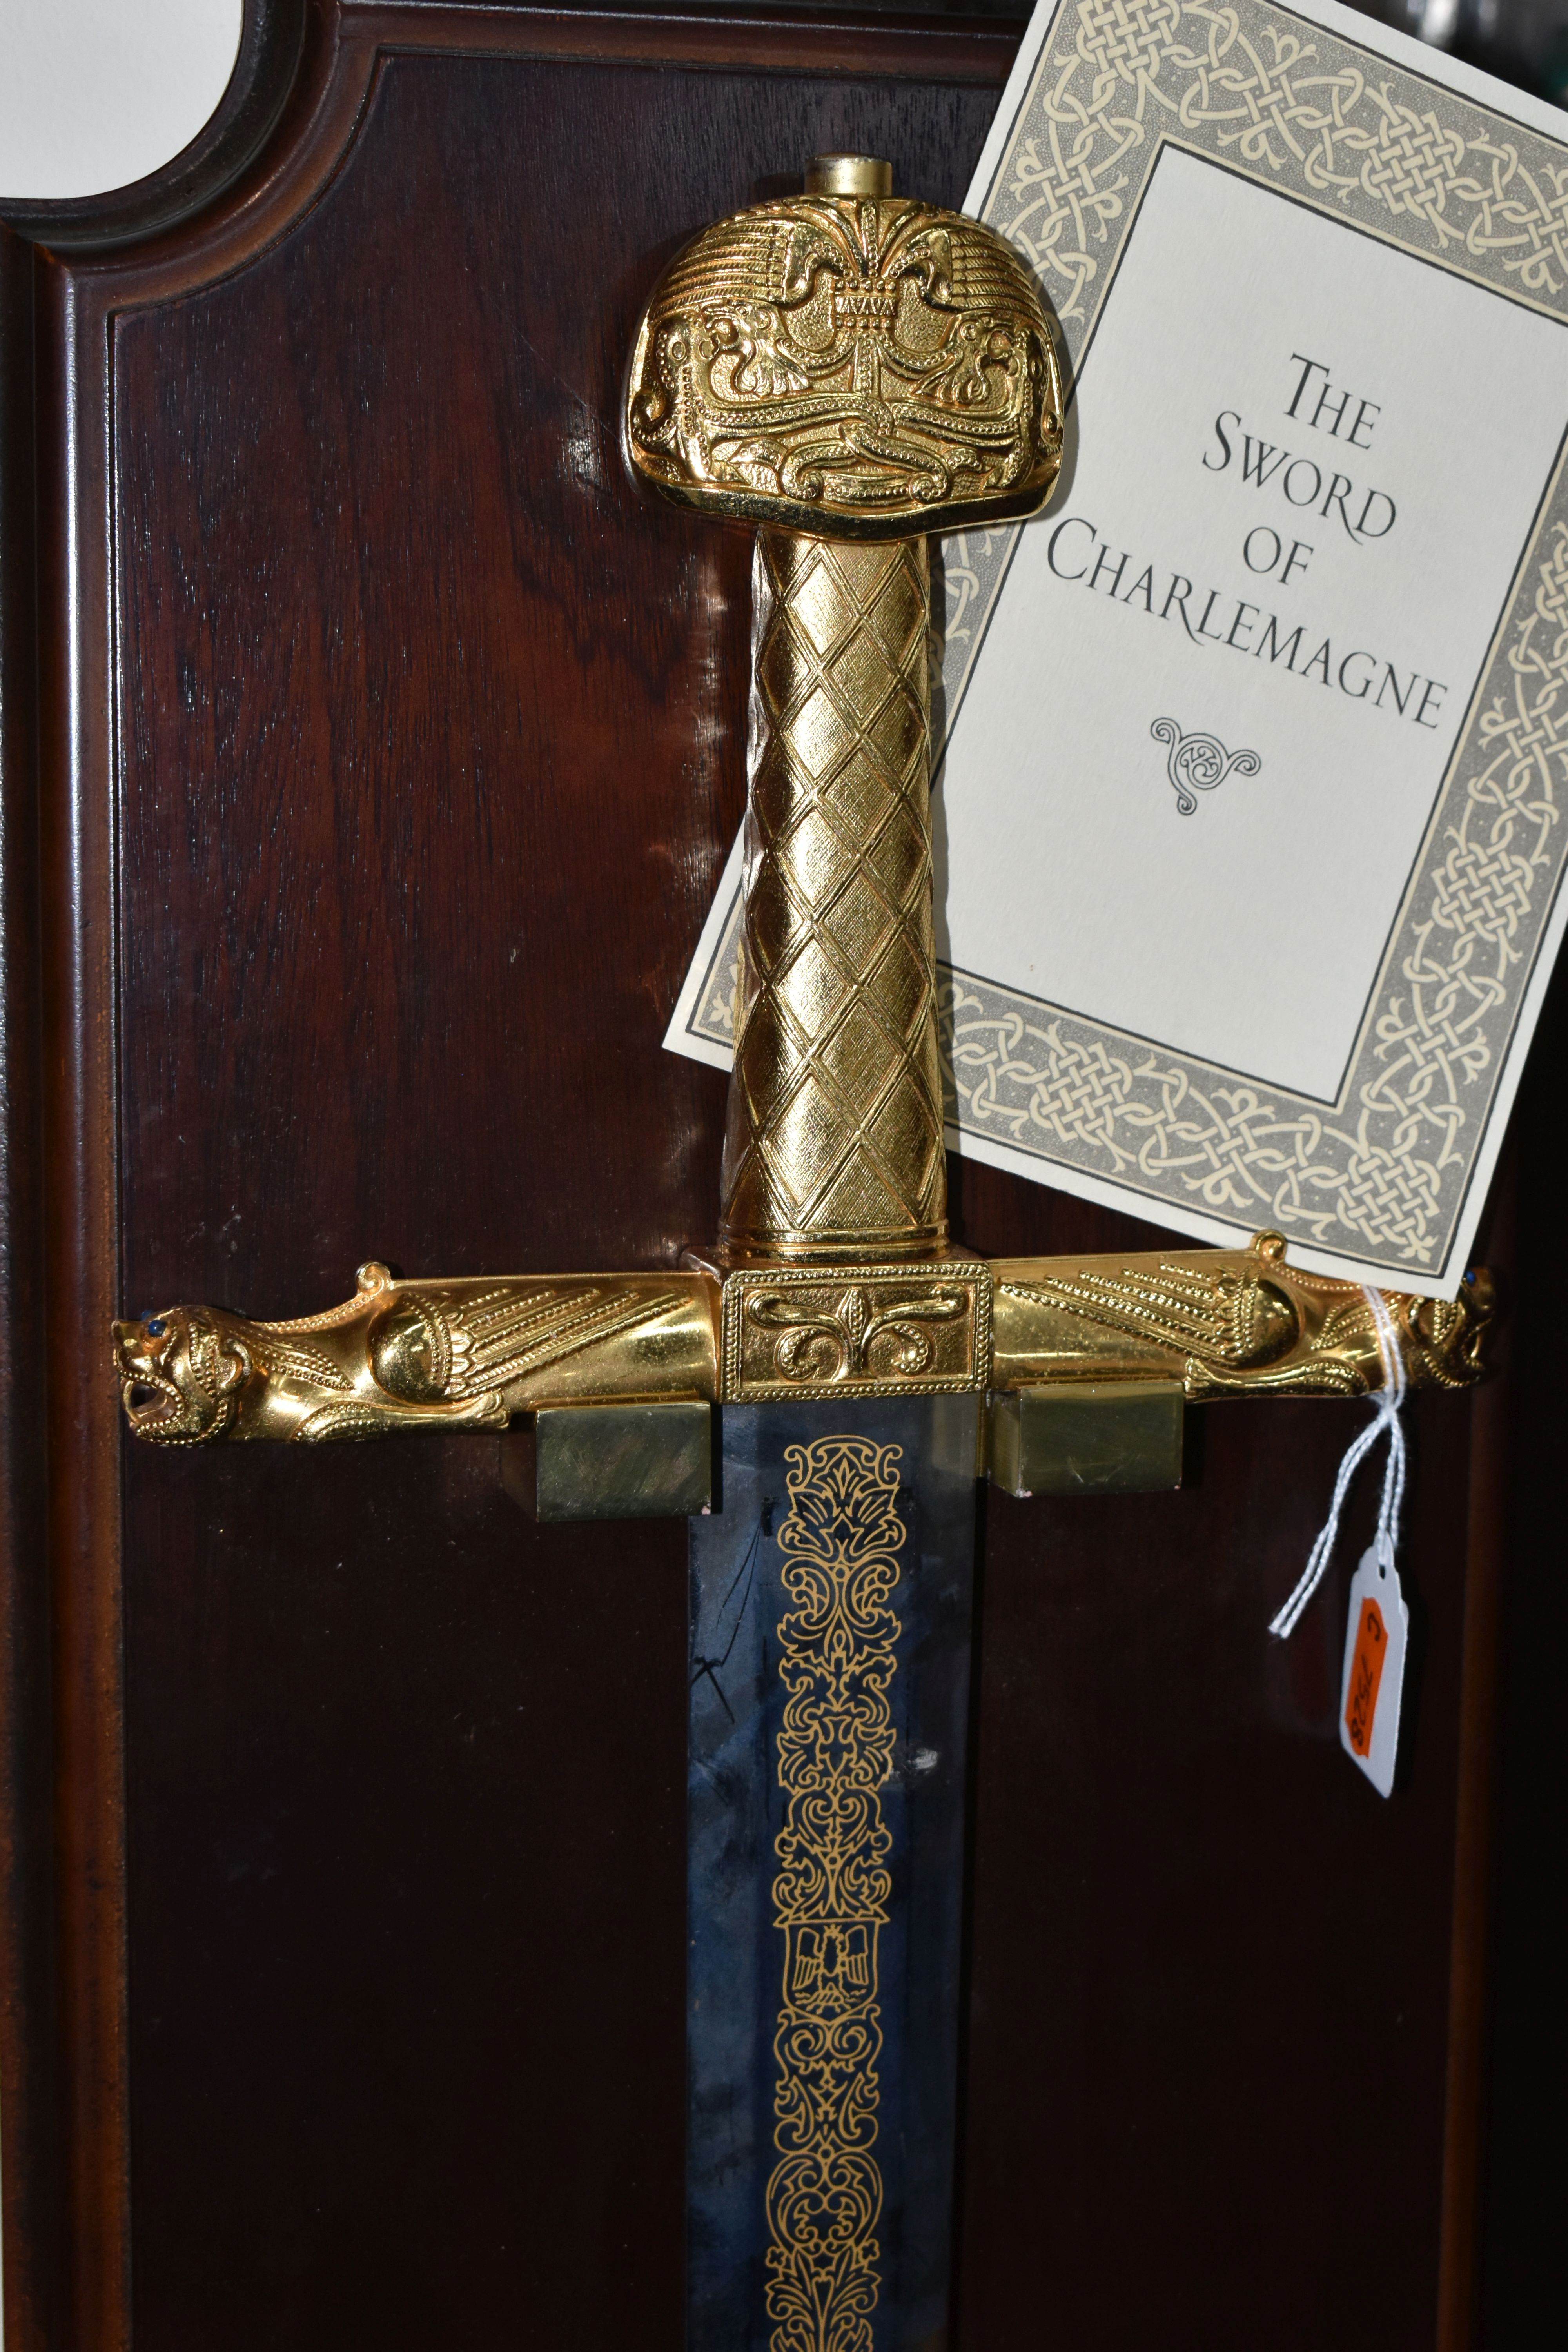 A REPRODUCTION FRANKLIN MINT SWORD OF CHARLEMAGNE WITH WOODEN DISPLAY BOARD AND CERTIFICATE, gold - Image 2 of 6